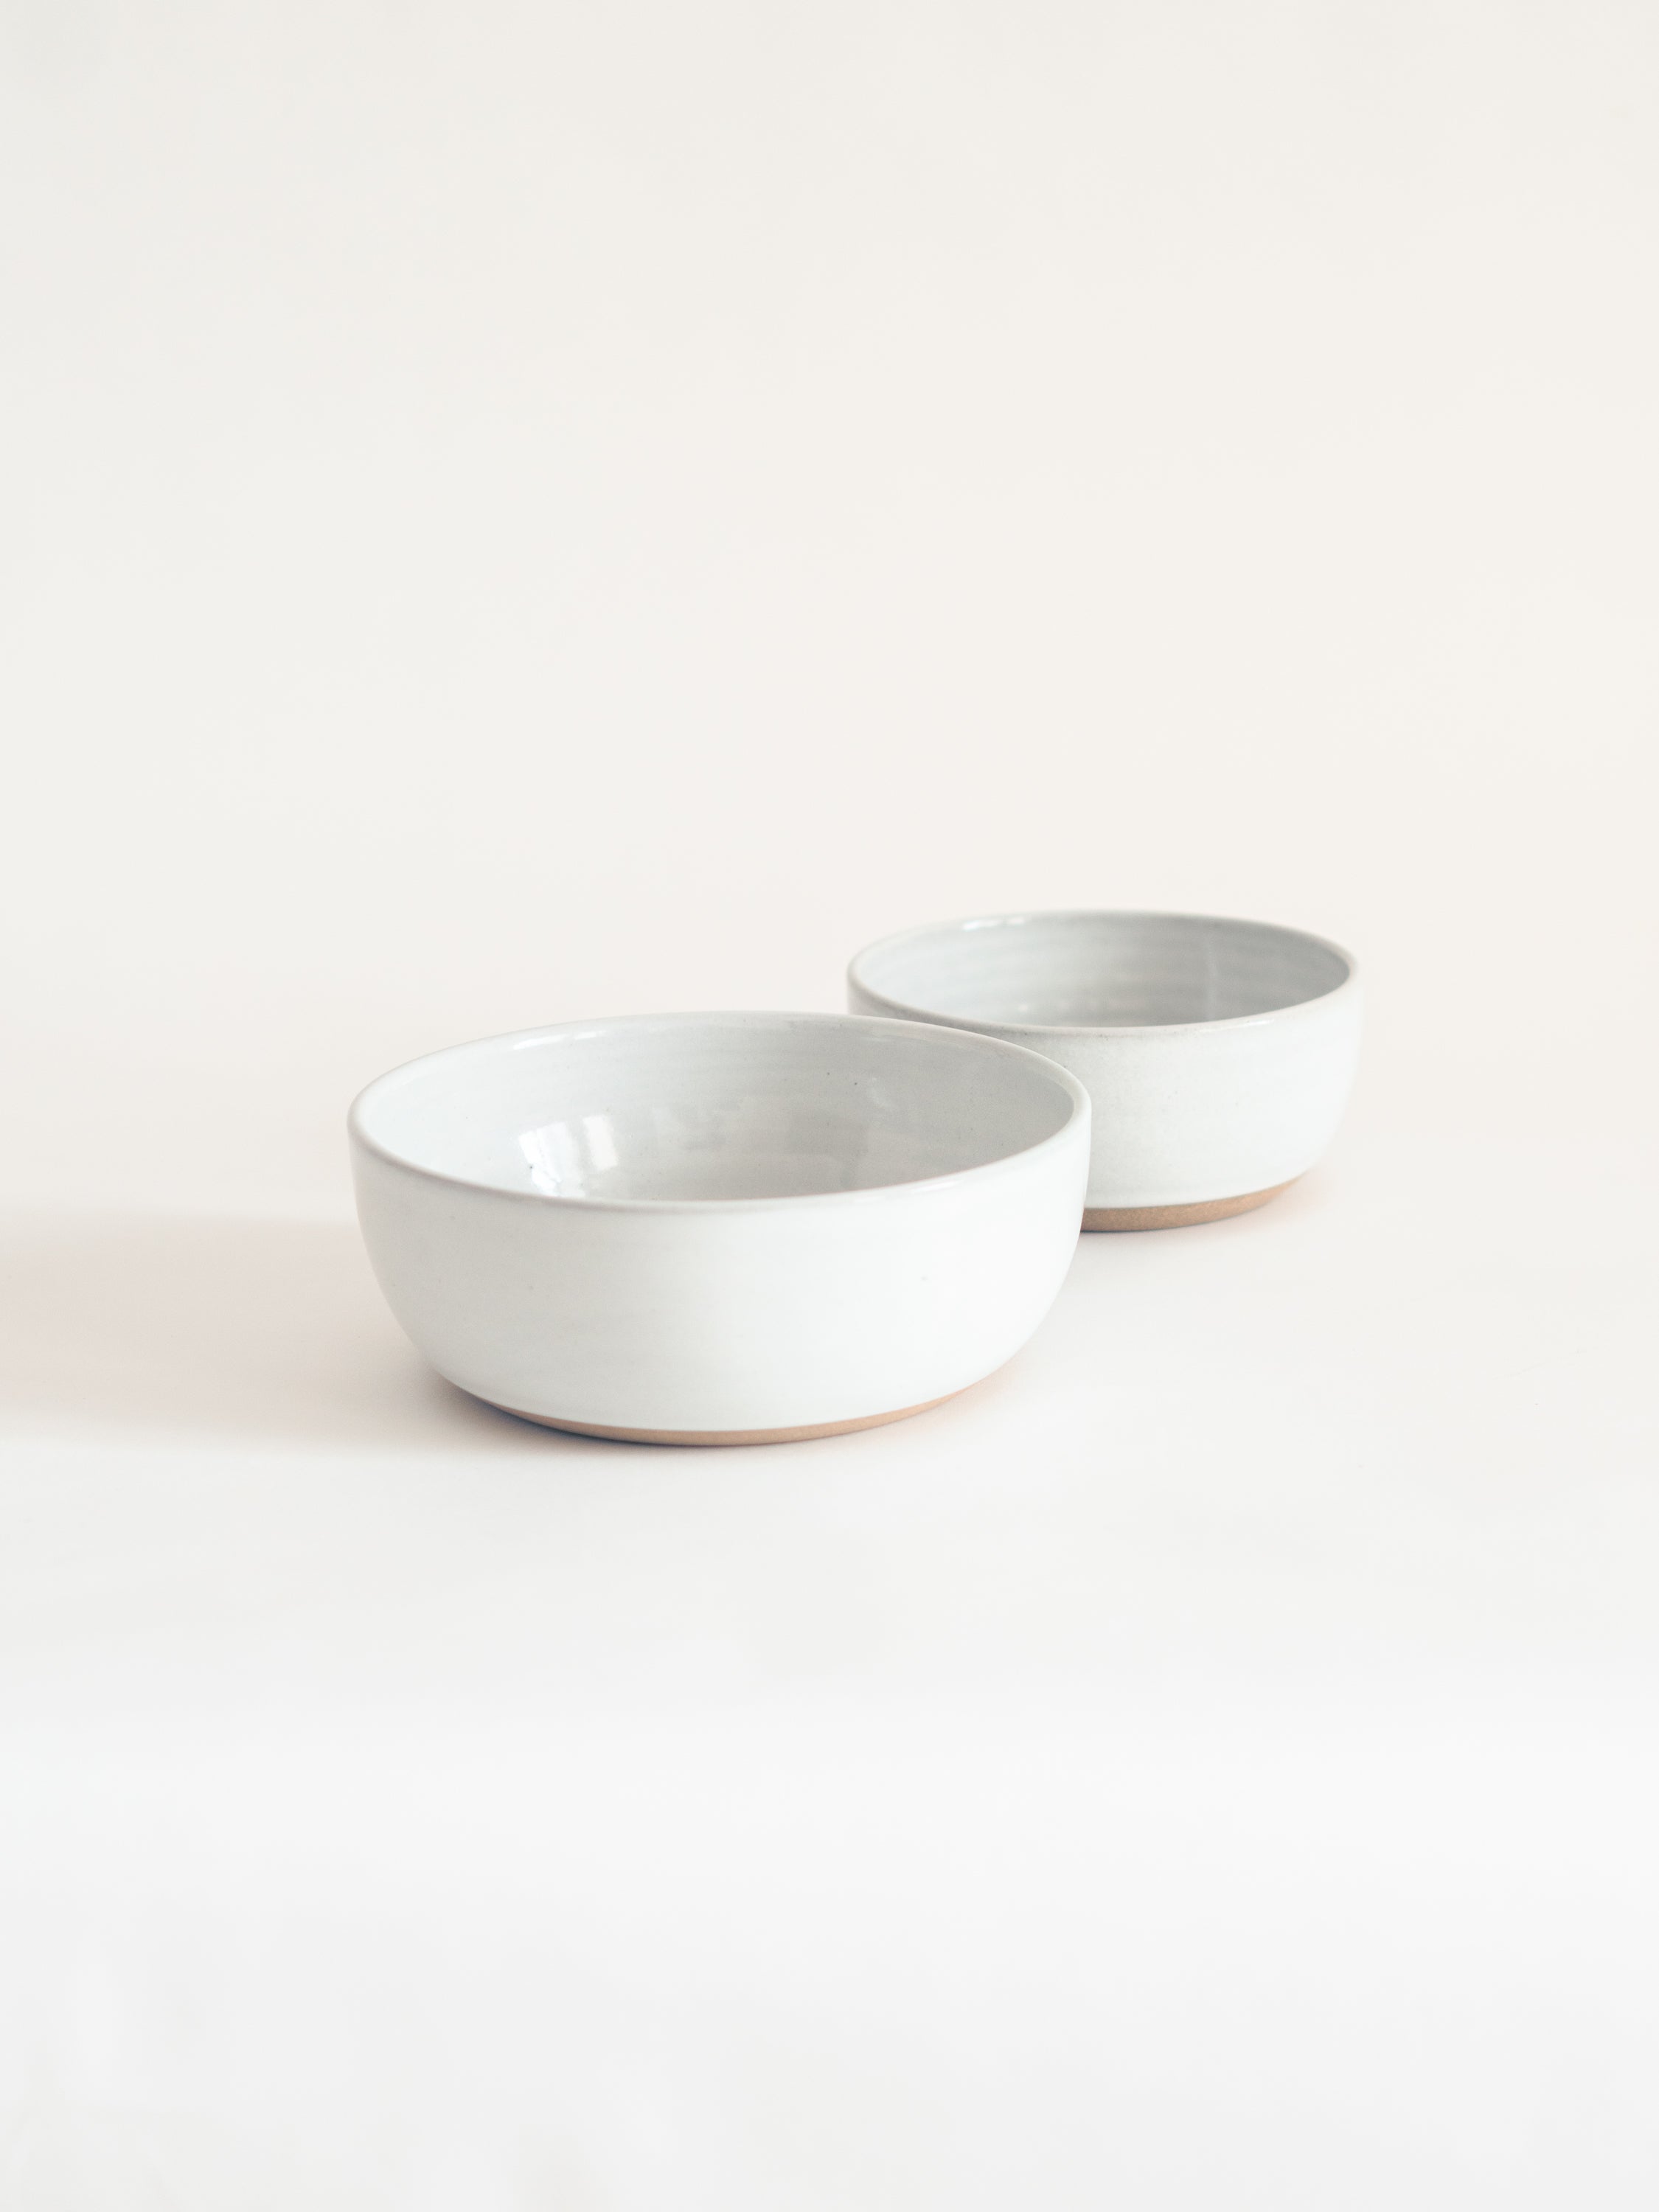 Snowdrop Serving bowls with Large in front